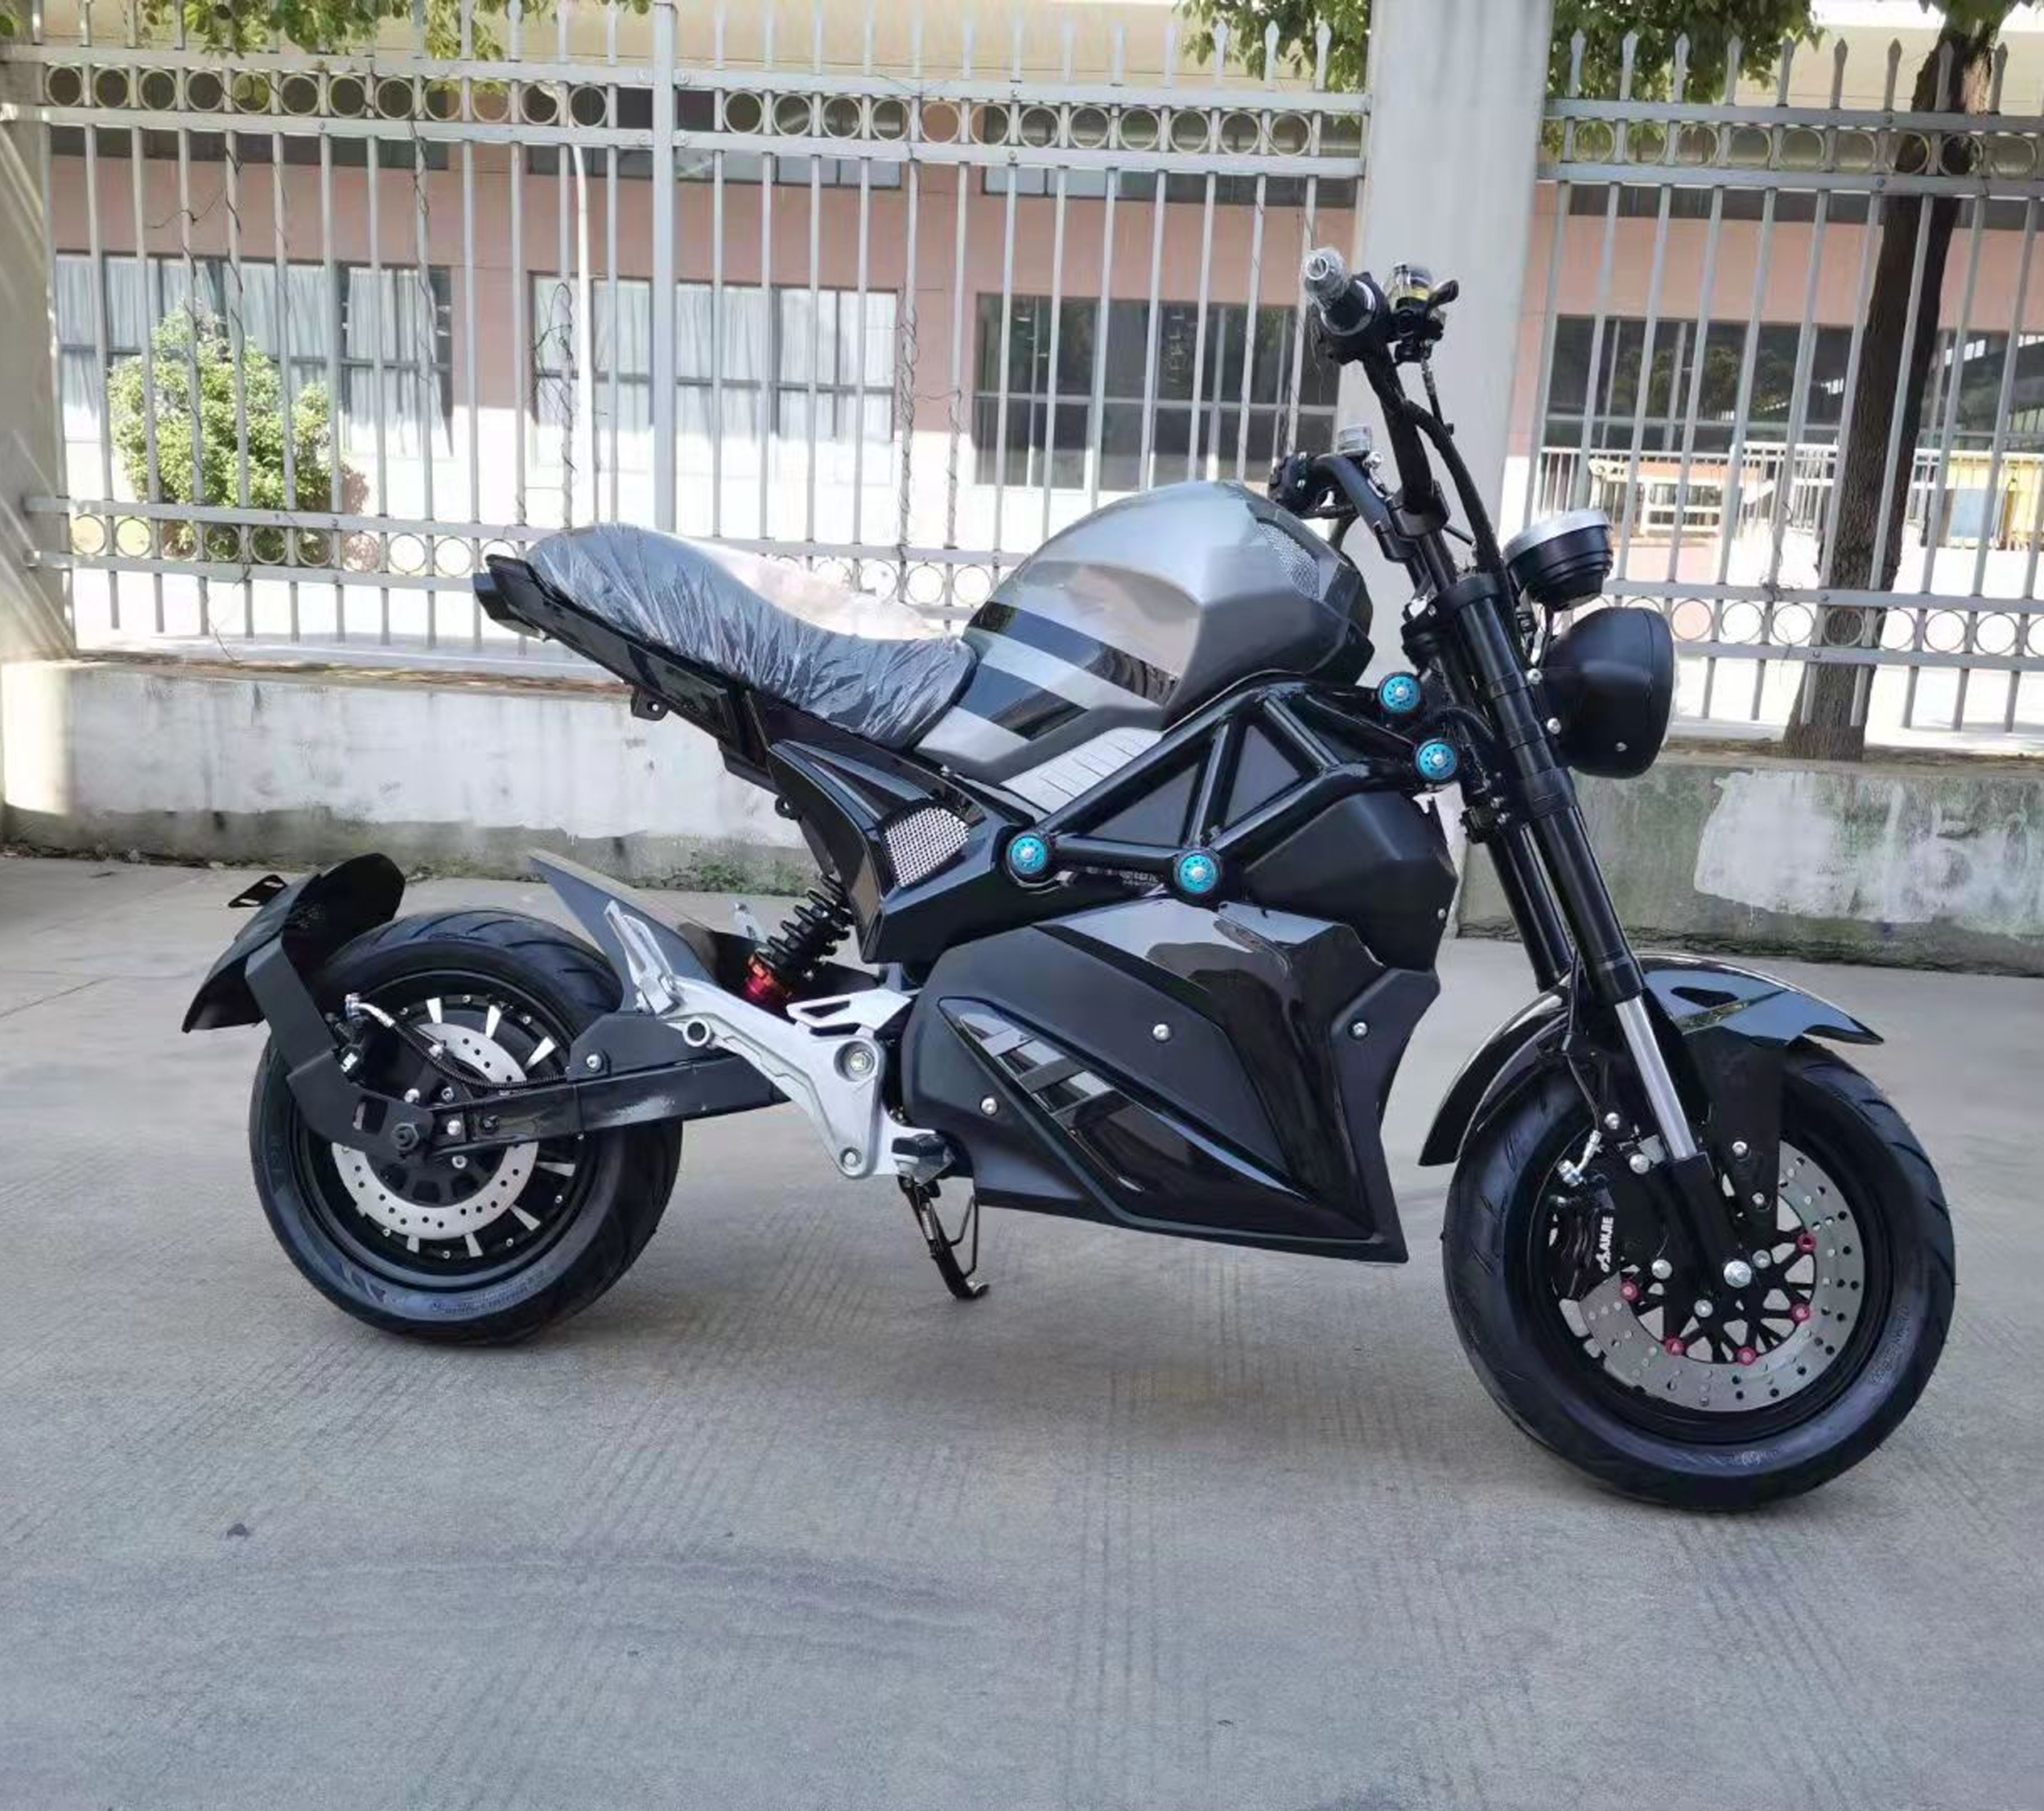 Retro-monster Adult 2 Wheel Electric offroad Motorcycle with long range distance